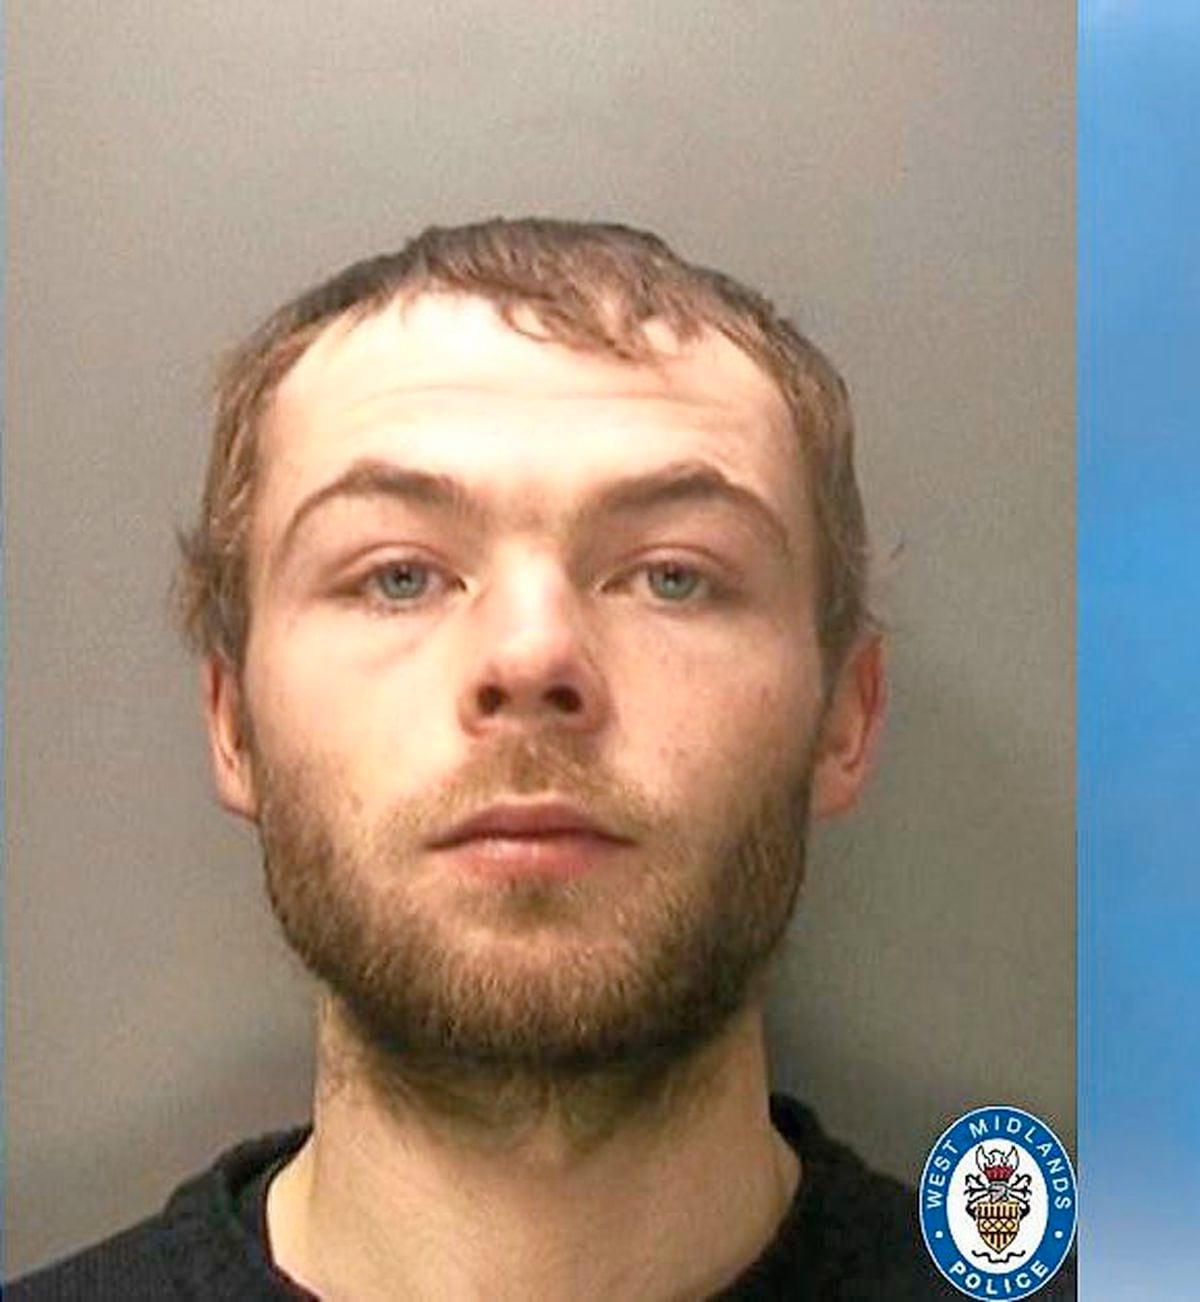 Matthew Marlow is wanted on suspicion of a serious assault (Image by West Midlands Police)